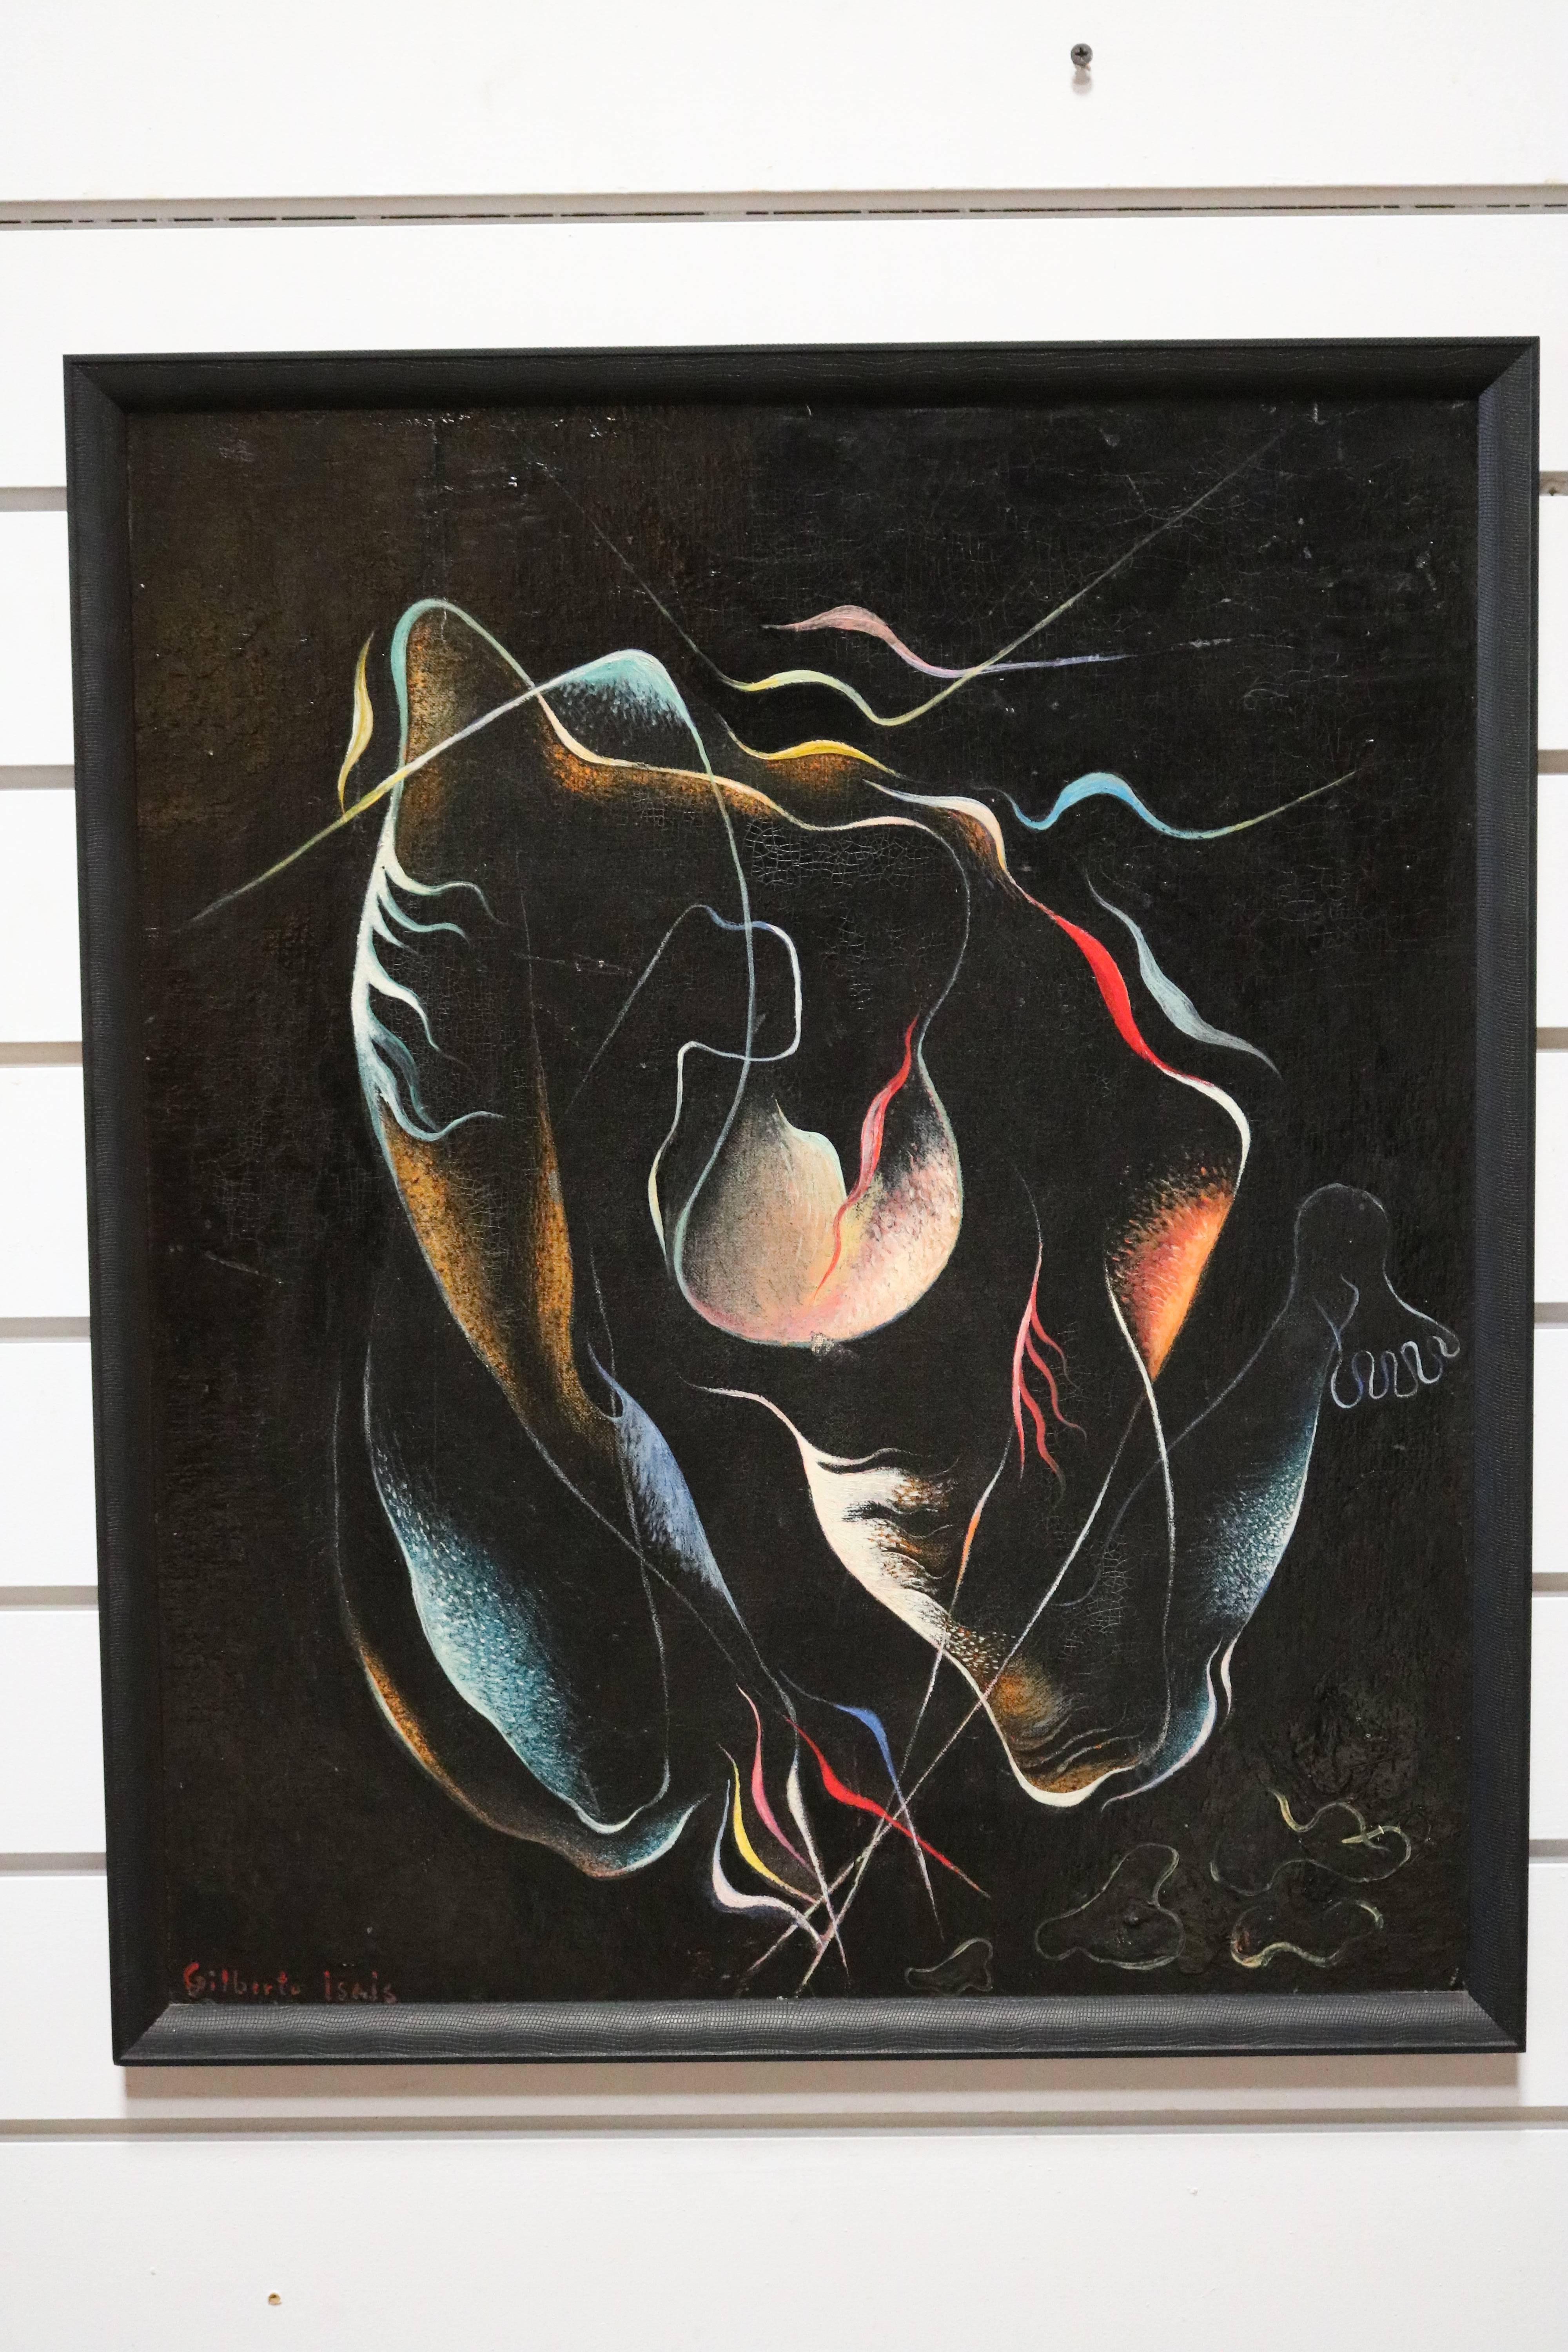 Framed oil painting signed Gilberto Isais. Painting depicts a kneeling man with his head lowered - you can see his foot on the right side of the painting and his hands joined on the front.